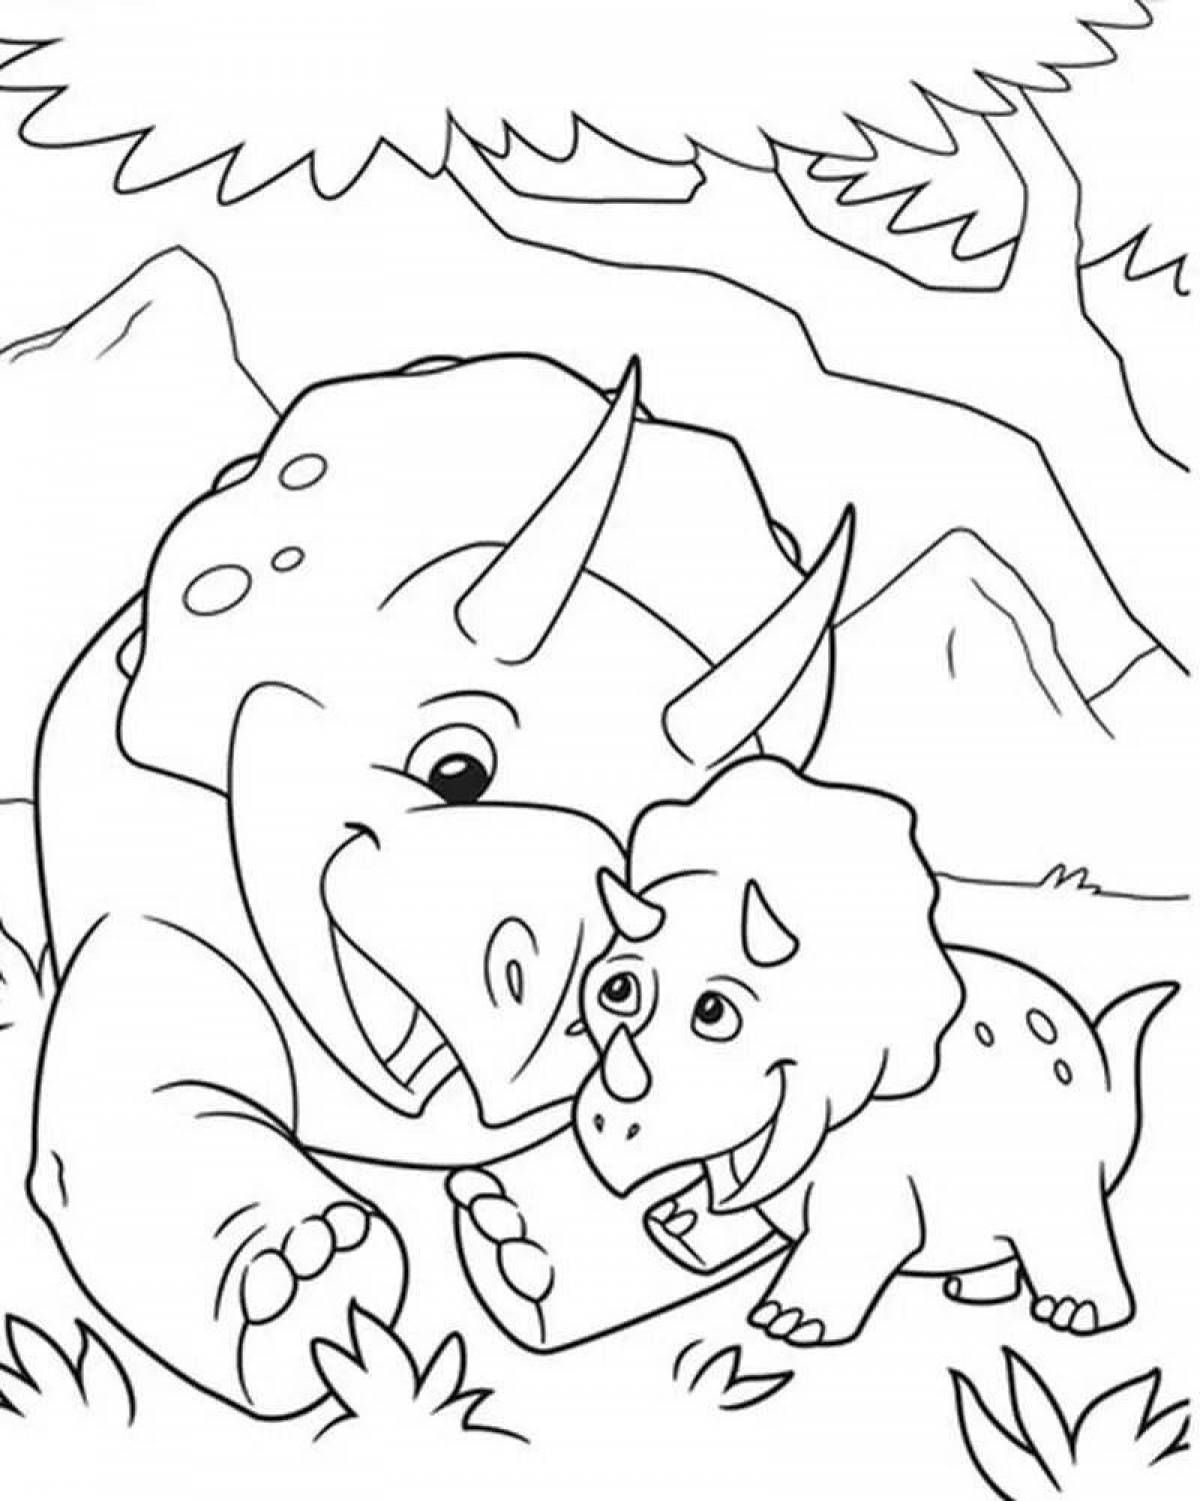 Excellent triceratops coloring page